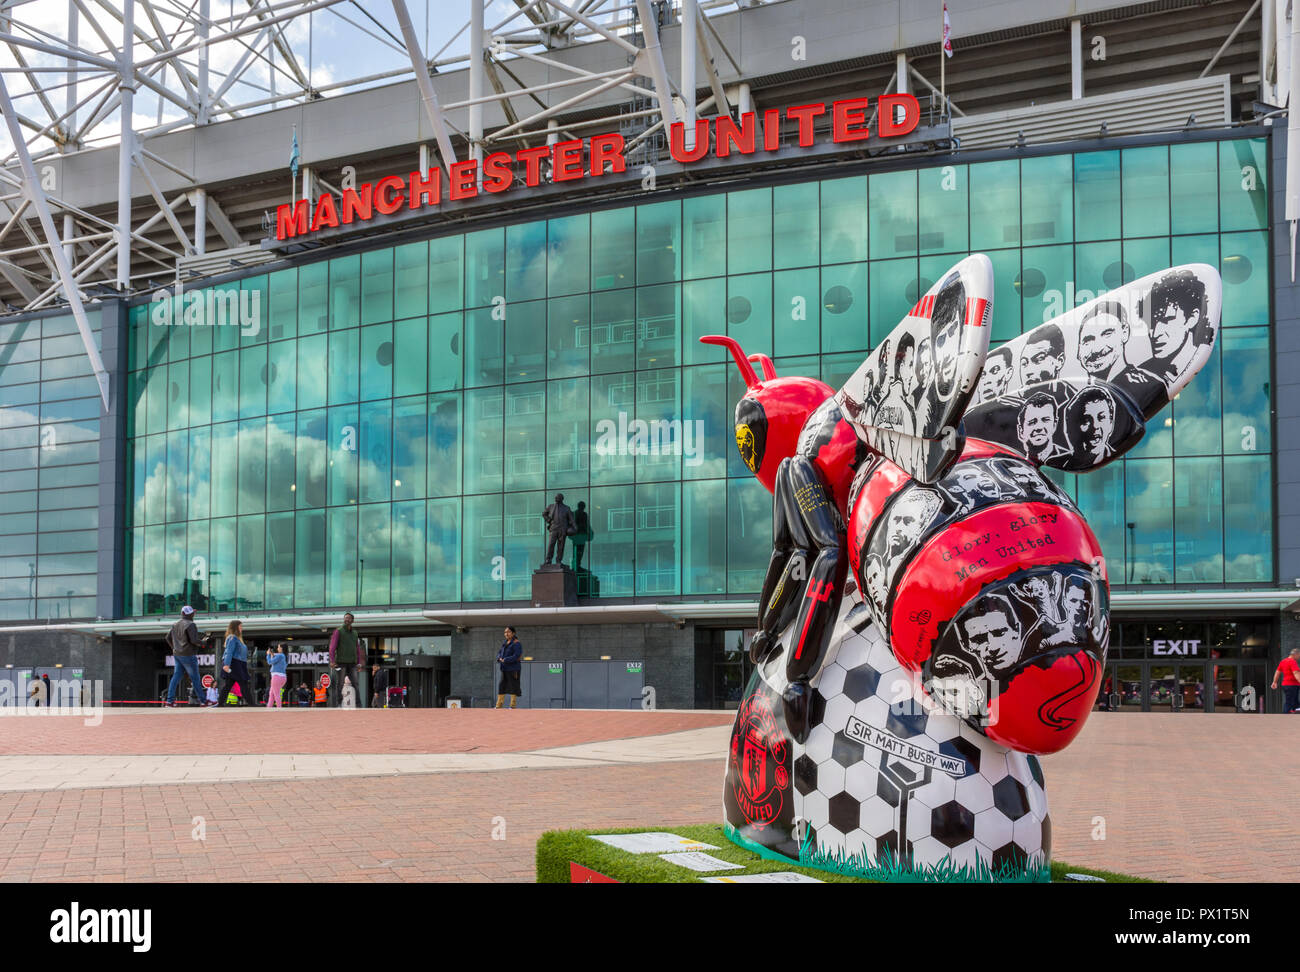 Bee United, by Joseph Venning.  One of the Bee in the City sculptures, at the Manchester United stadium, Old Trafford, Manchester, UK. Stock Photo